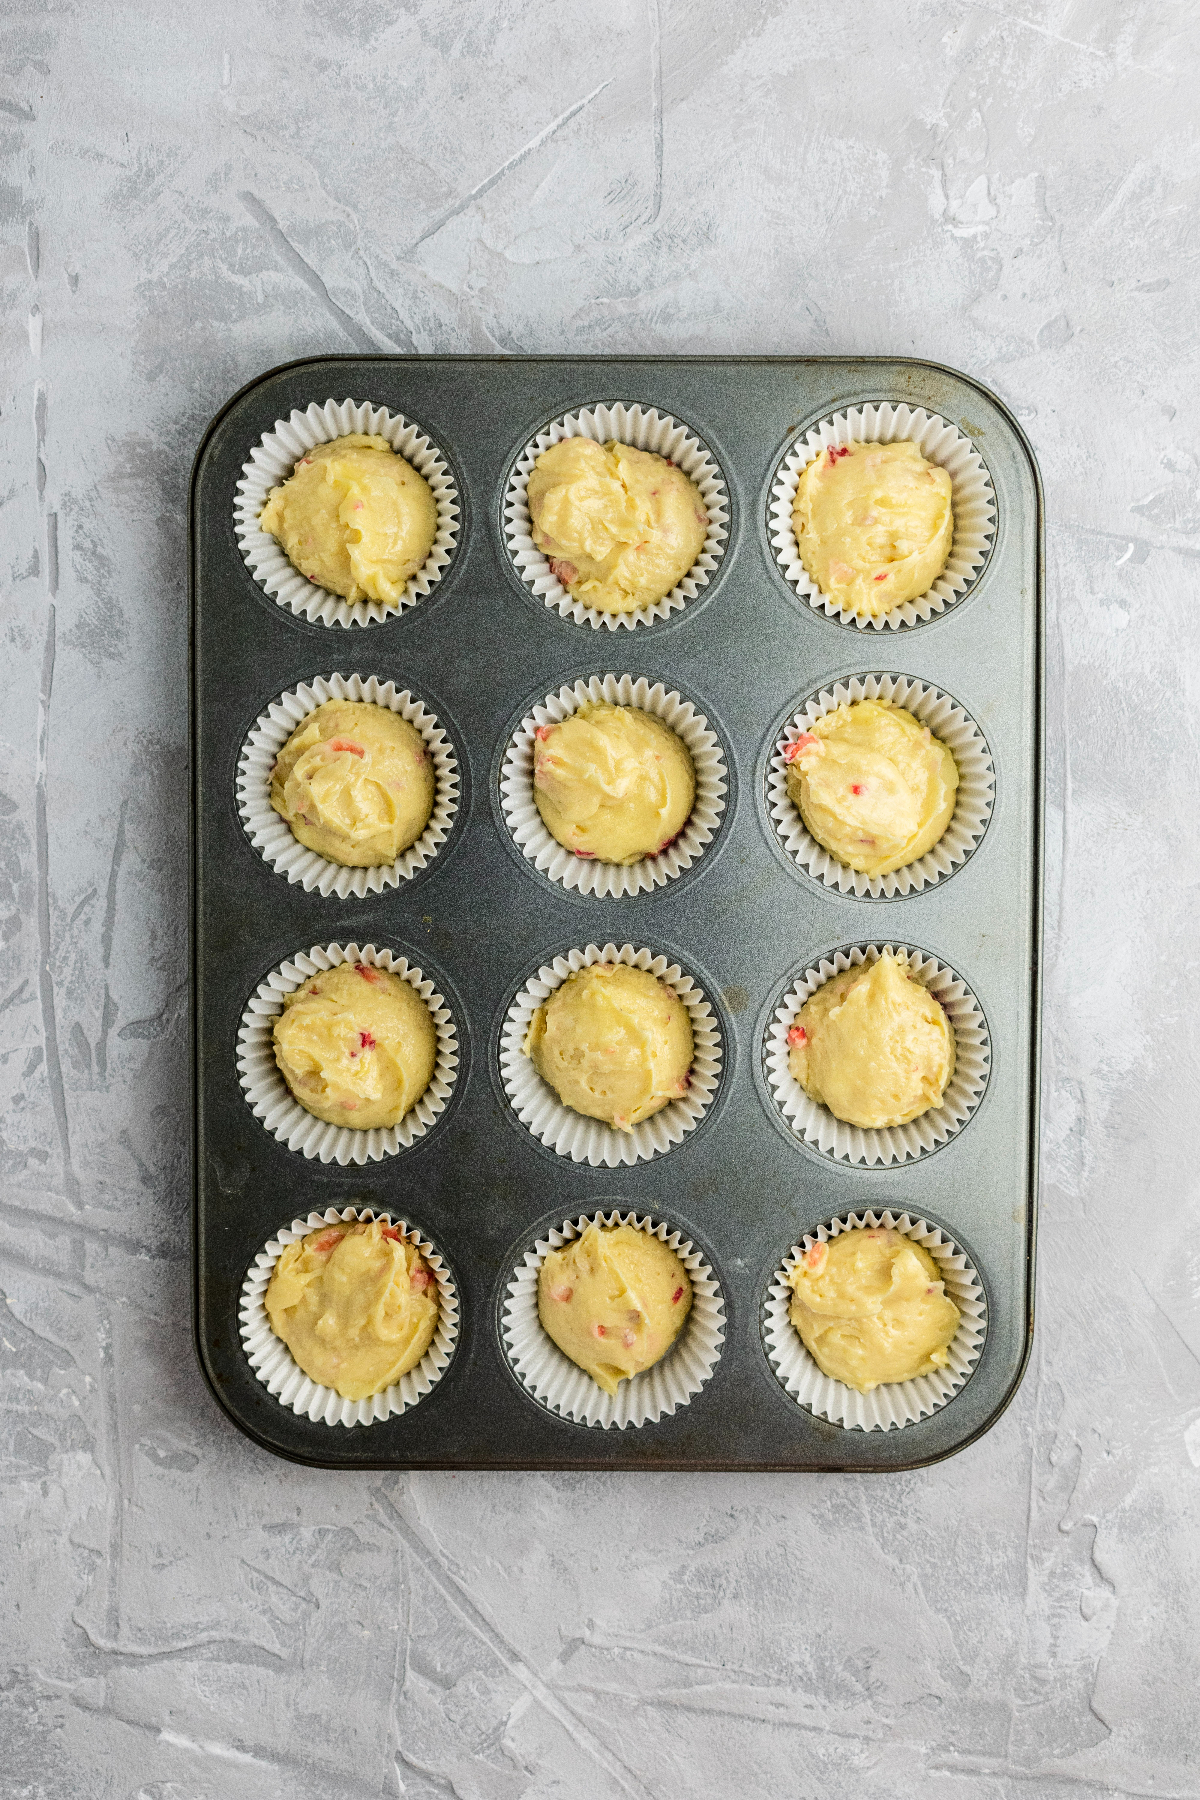 Muffin pan filled with batter and ready to bake.